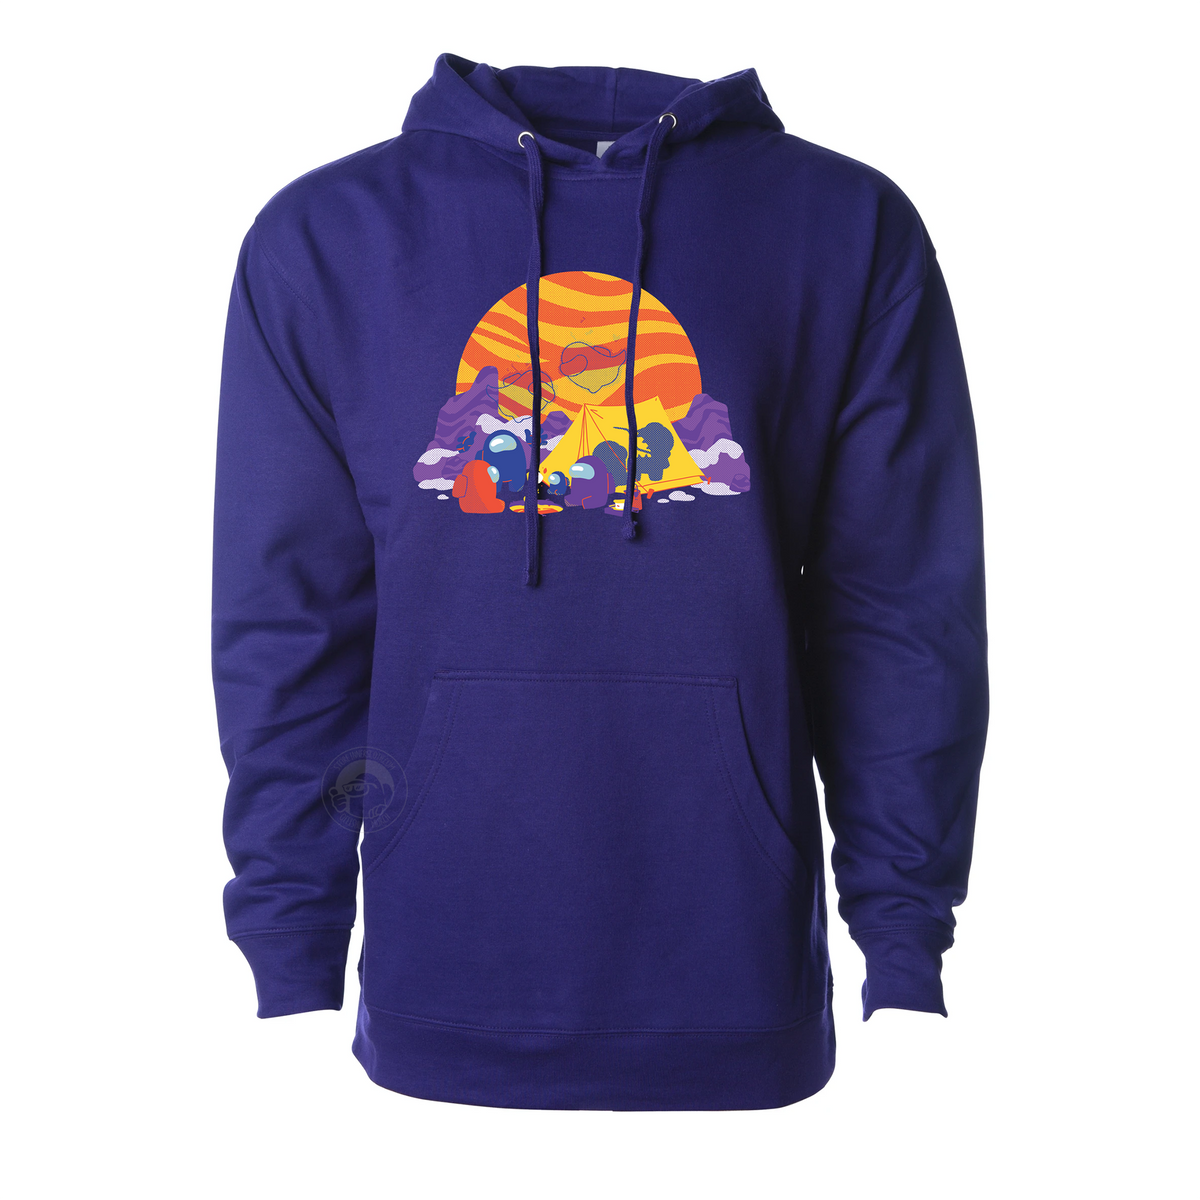 A product photo of the Among Us: Polus Camping Hoodie. The hoodie is purple and the printed illustration depicts a purple, blue and red crewmates with a camping tent among the snowy mountains of Polus with a large orange and yellow swirly sun in the background.